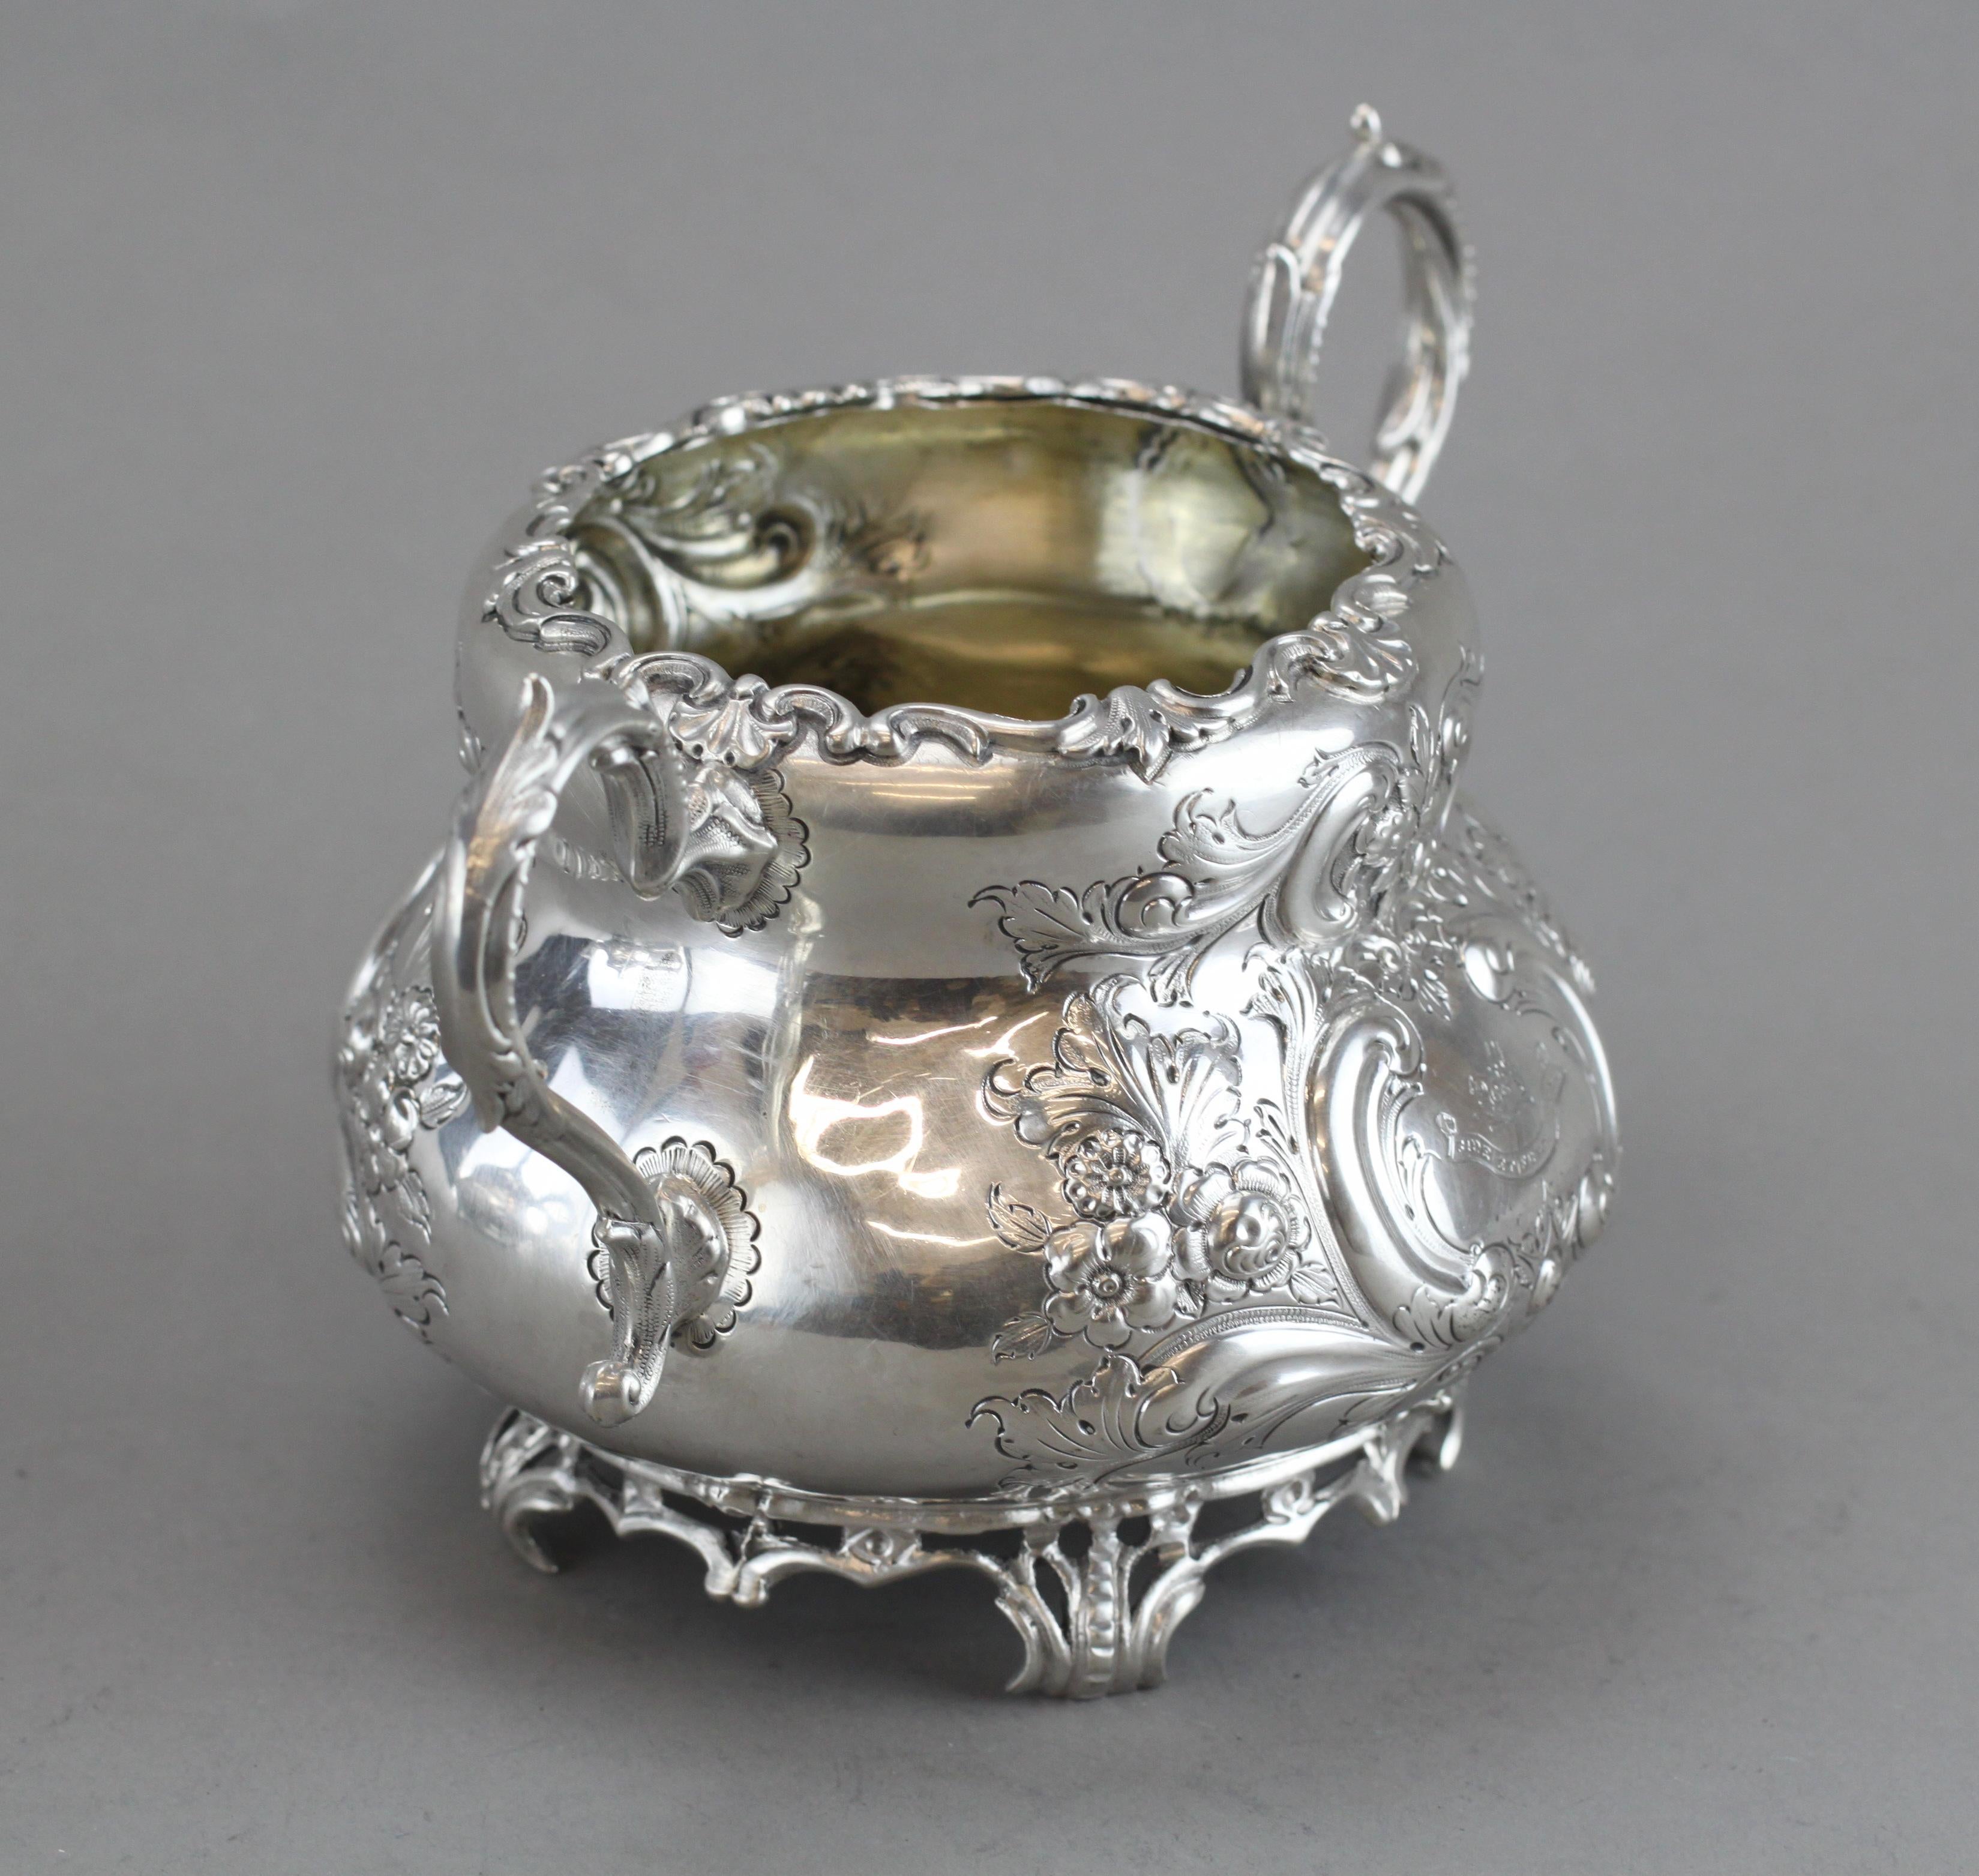 Antique Silver Tea Service Set, by Charles Lambe, Made in Dublin 1900 4